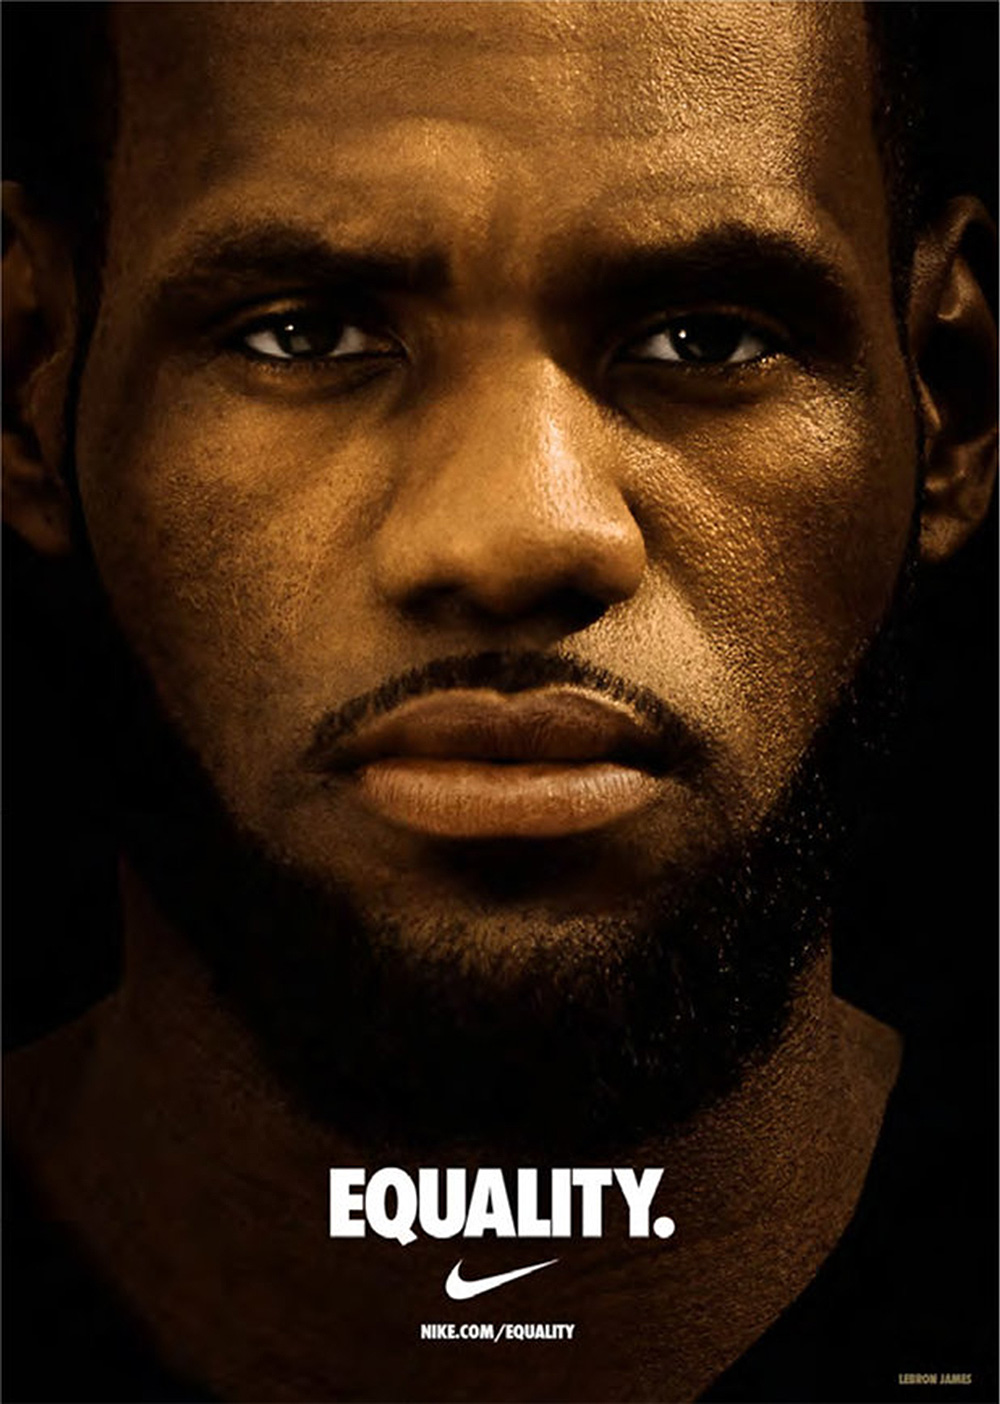 Case-by-Case-NYC-OPEN-topics-2018-Nike-equality-posters_2(LeBron).jpg